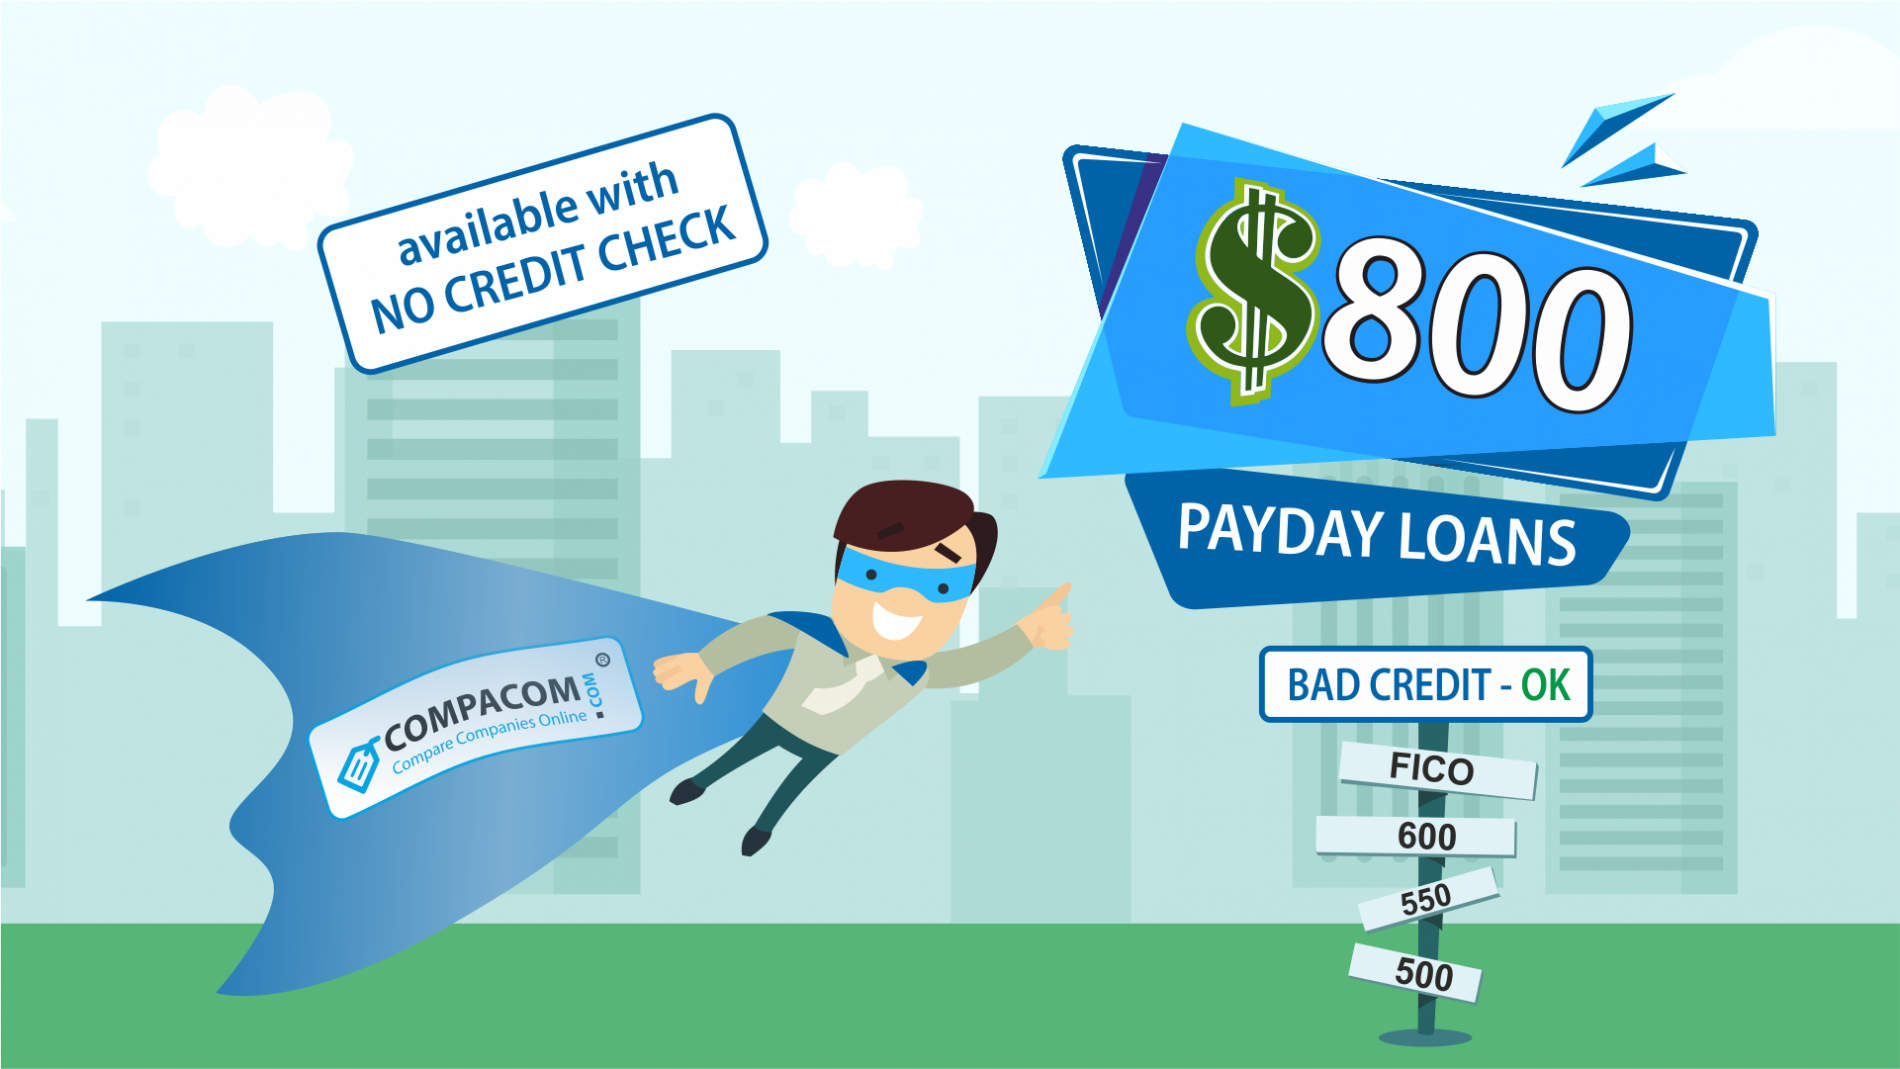 $800 Payday Loans